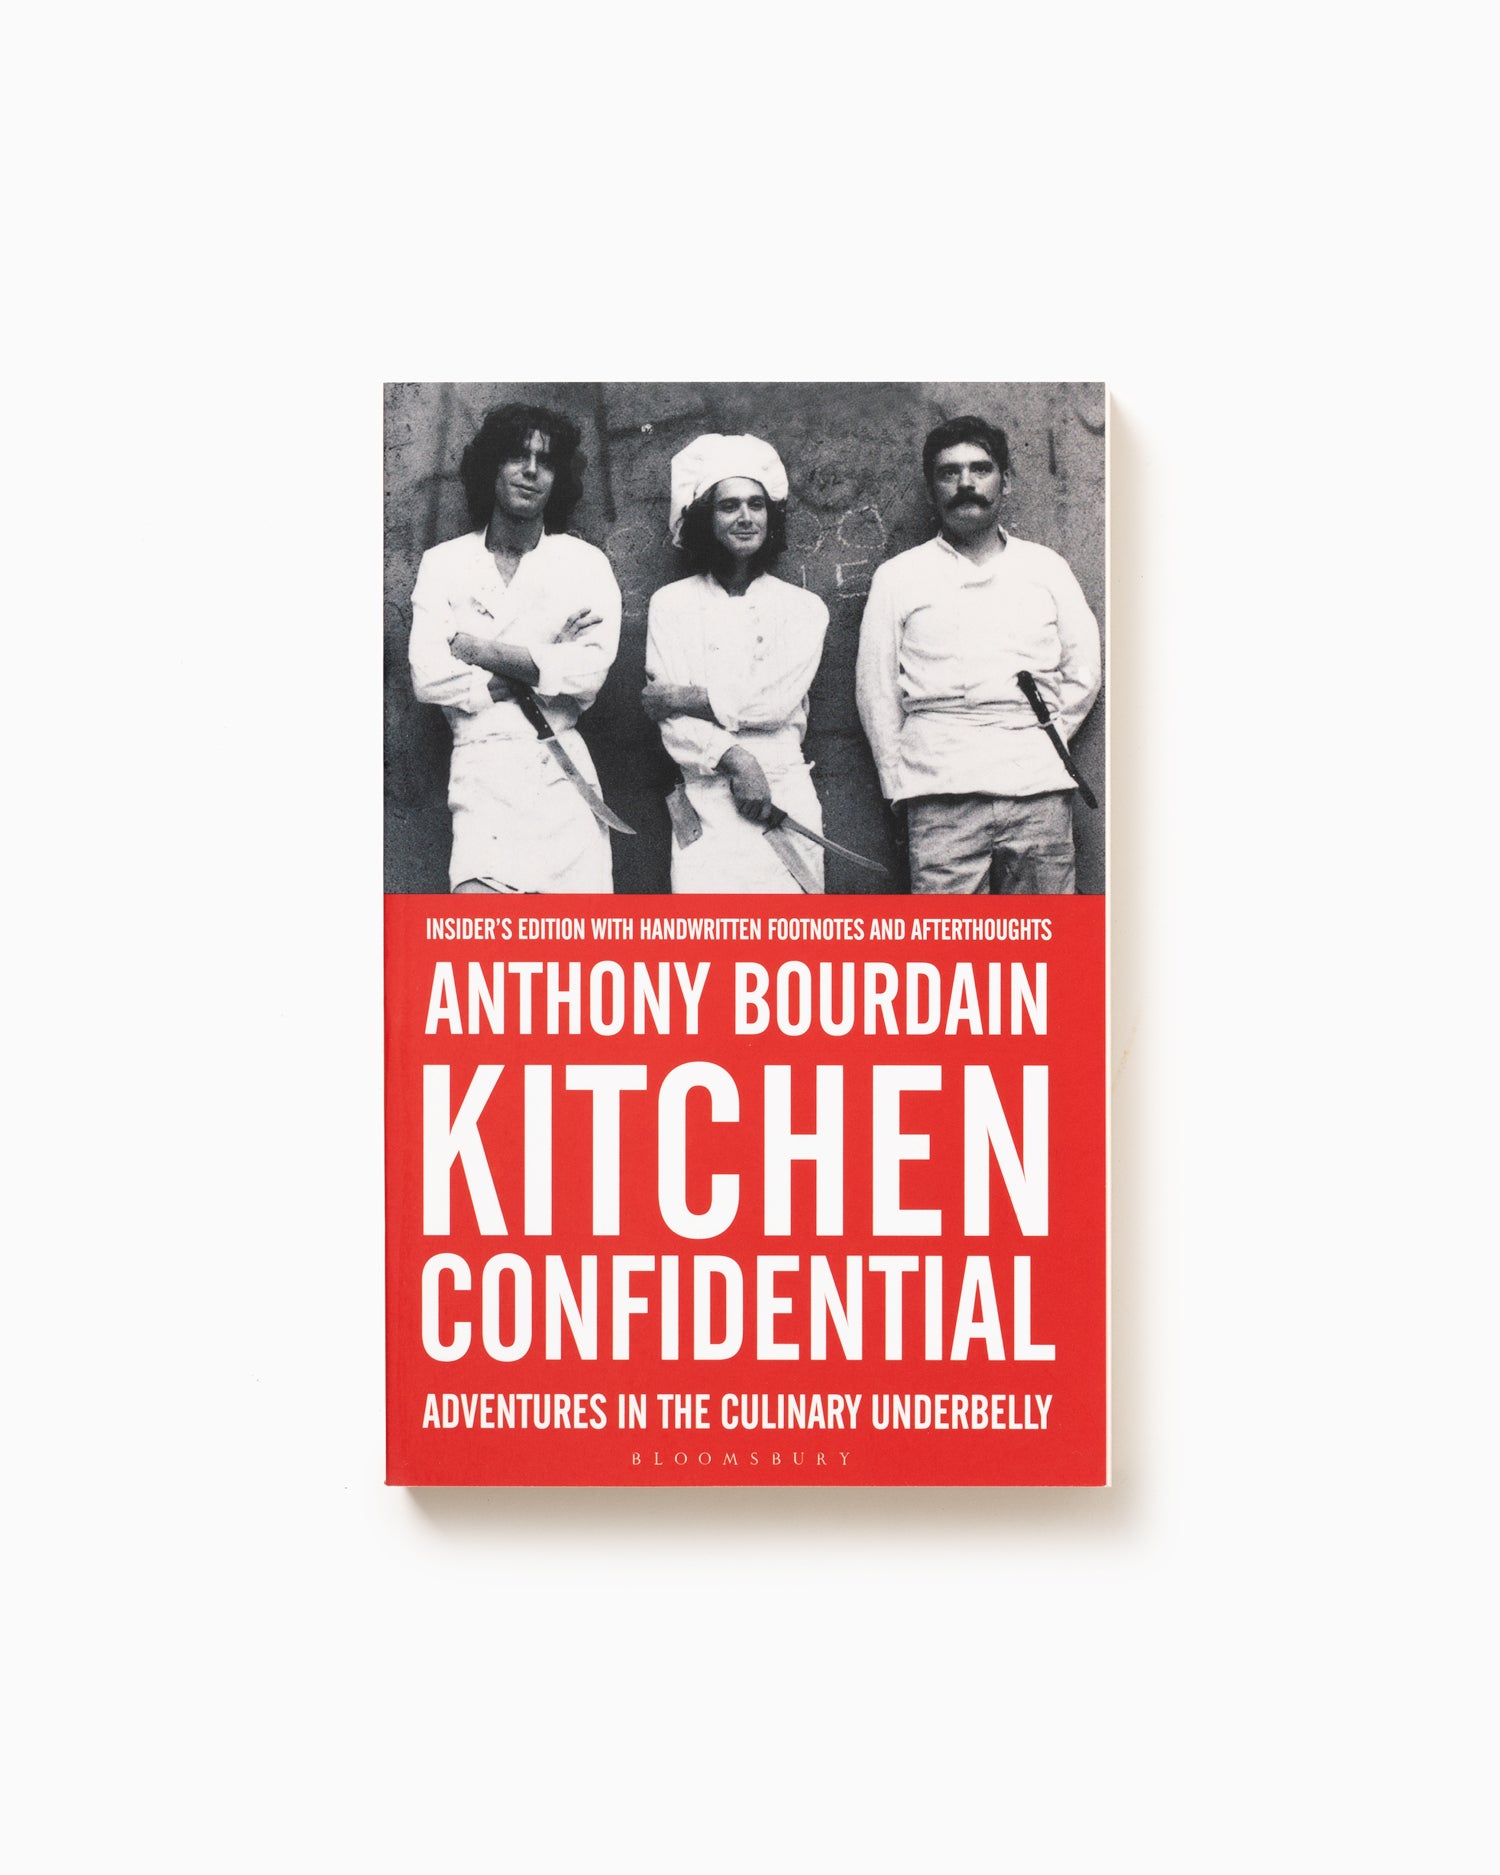 https://cdn.shopify.com/s/files/1/0163/9128/products/Kitchen-Confidential-1.jpg?v=1679599415&width=1500